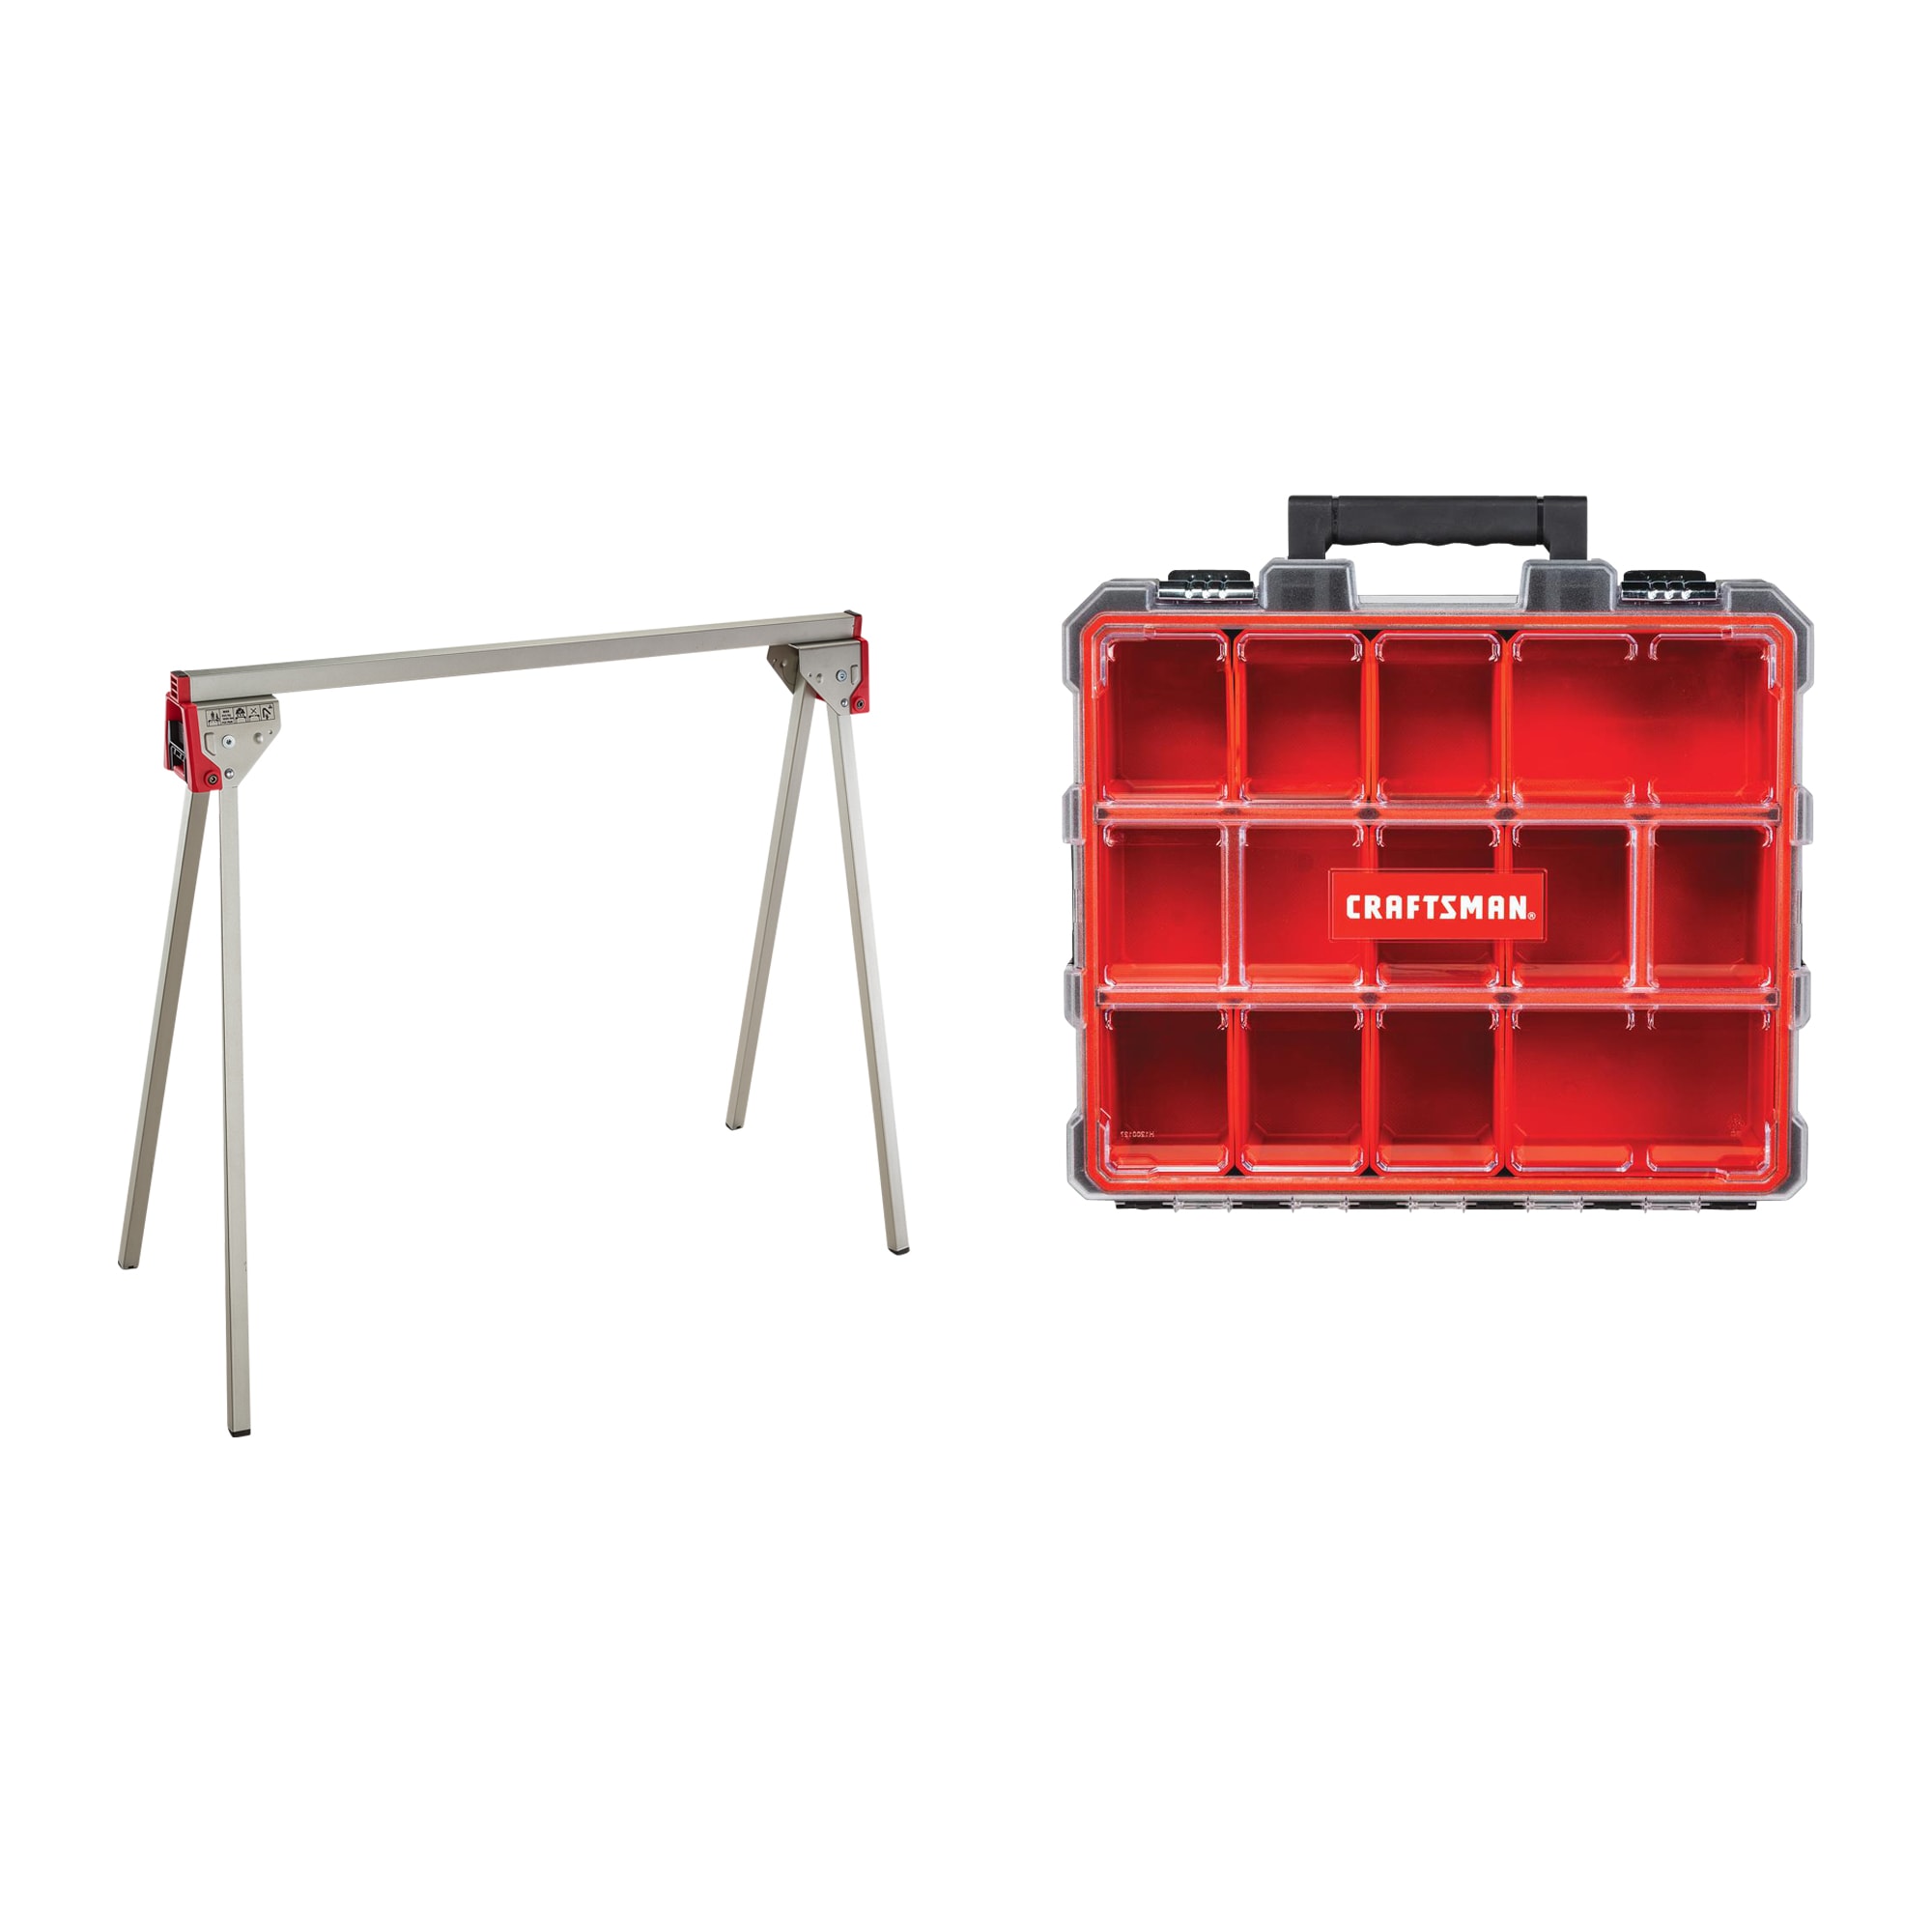 Waterproof Tool Storage & Work Benches at